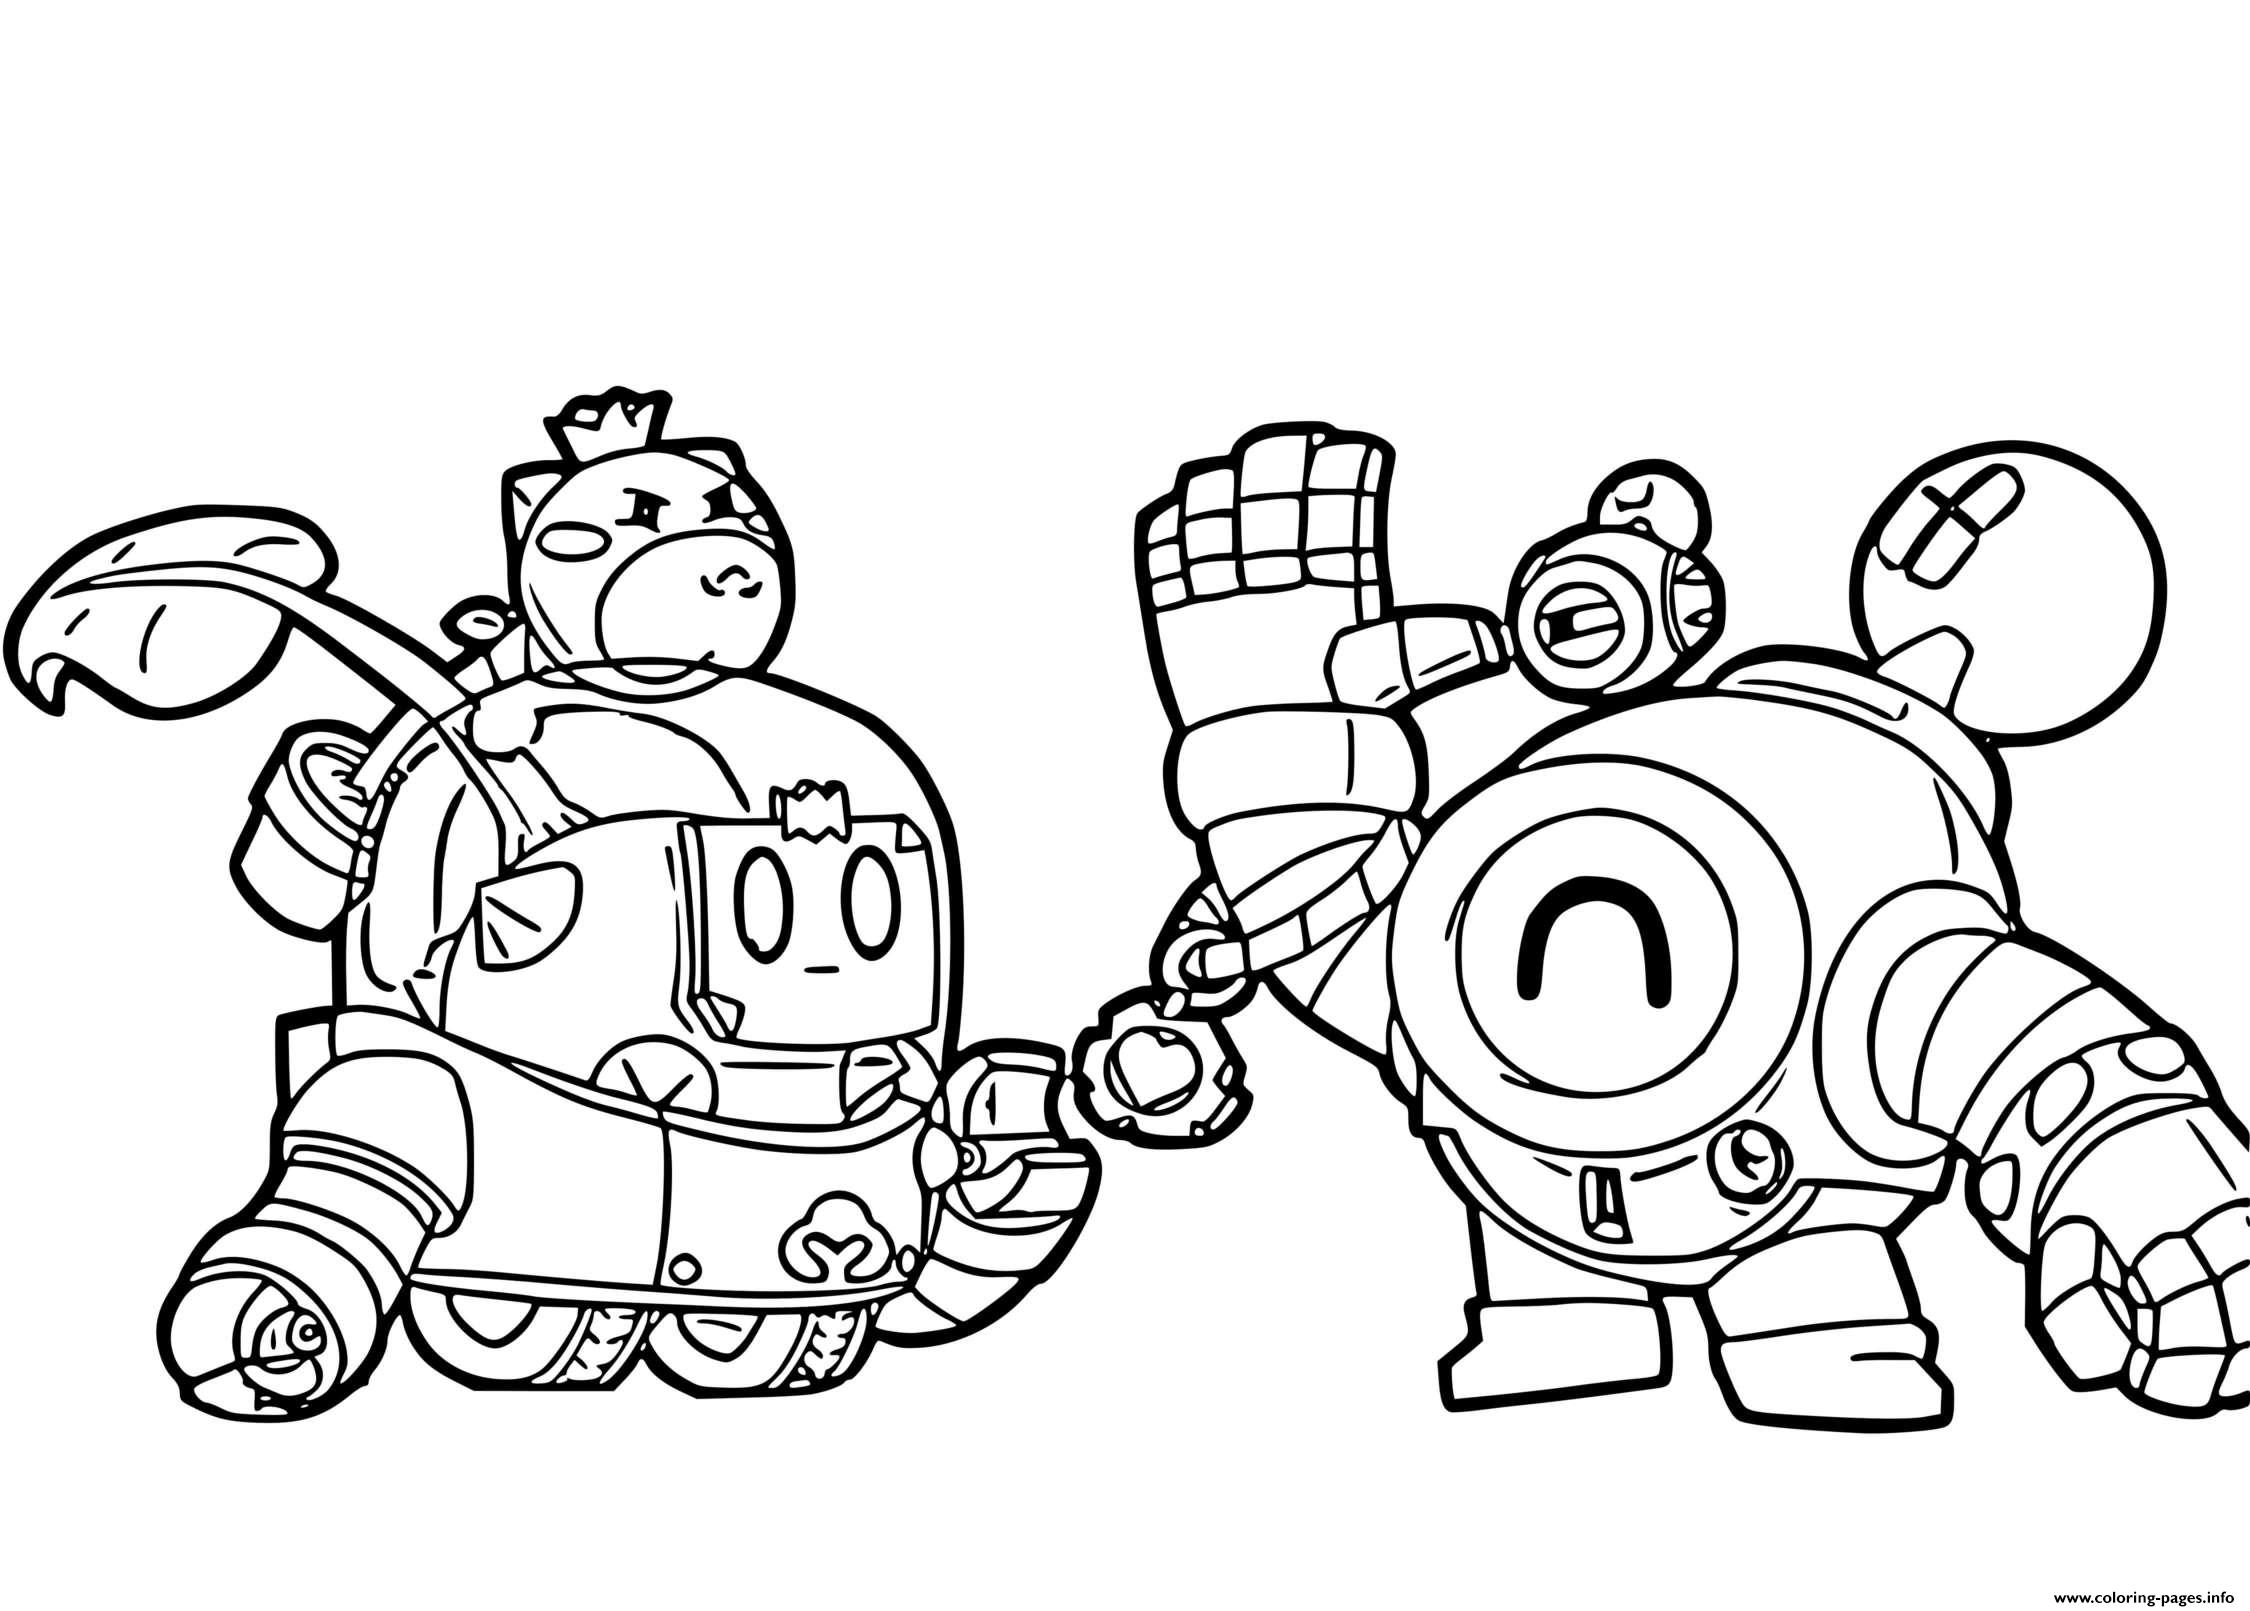 Sprout Et Nani Brawl Stars Coloring Pages Printable - bull brawl stars coloring pages